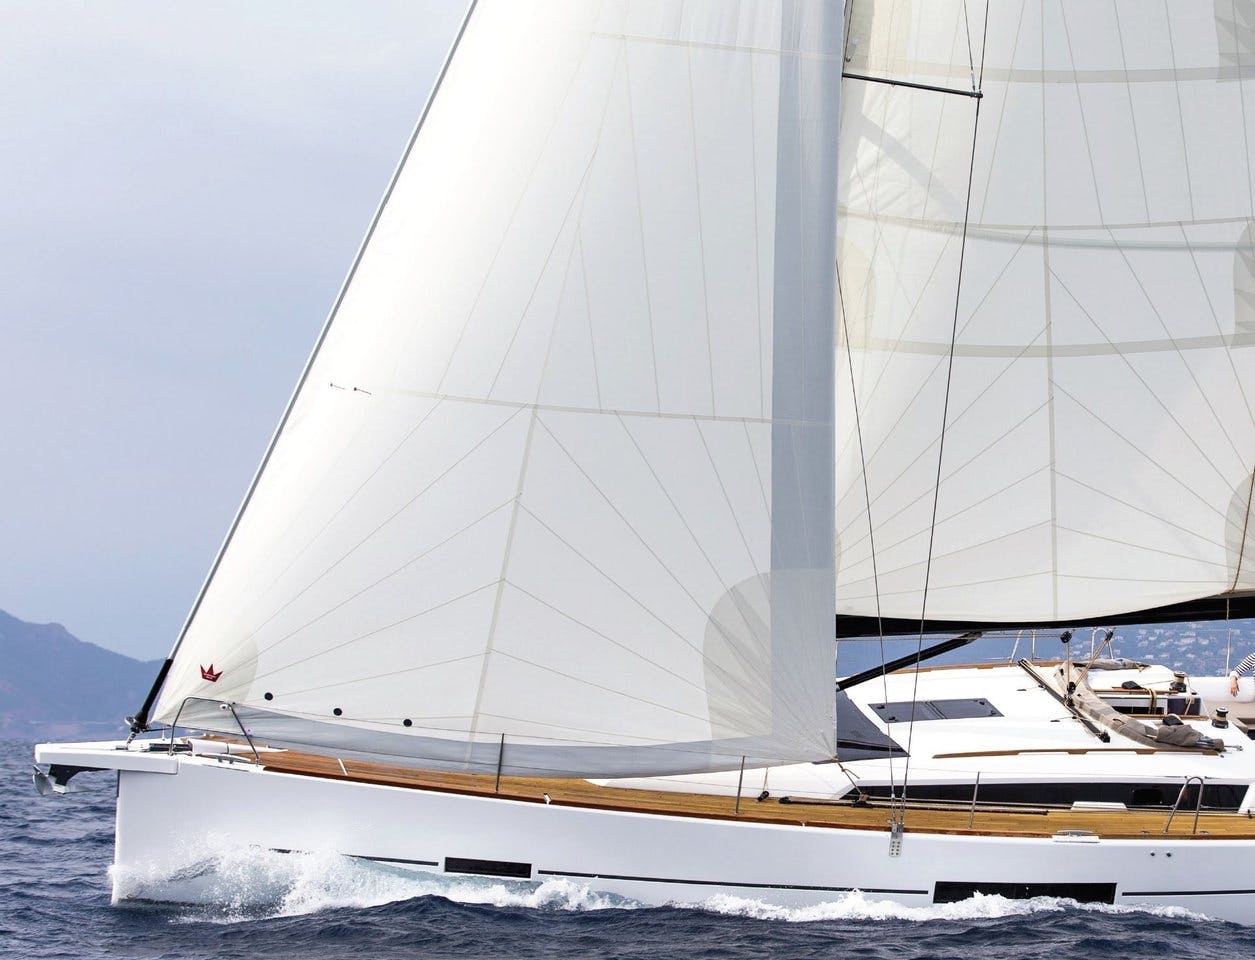 Book Dufour 520 GL Sailing yacht for bareboat charter in Olbia, Sardinia, Italy with TripYacht!, picture 5